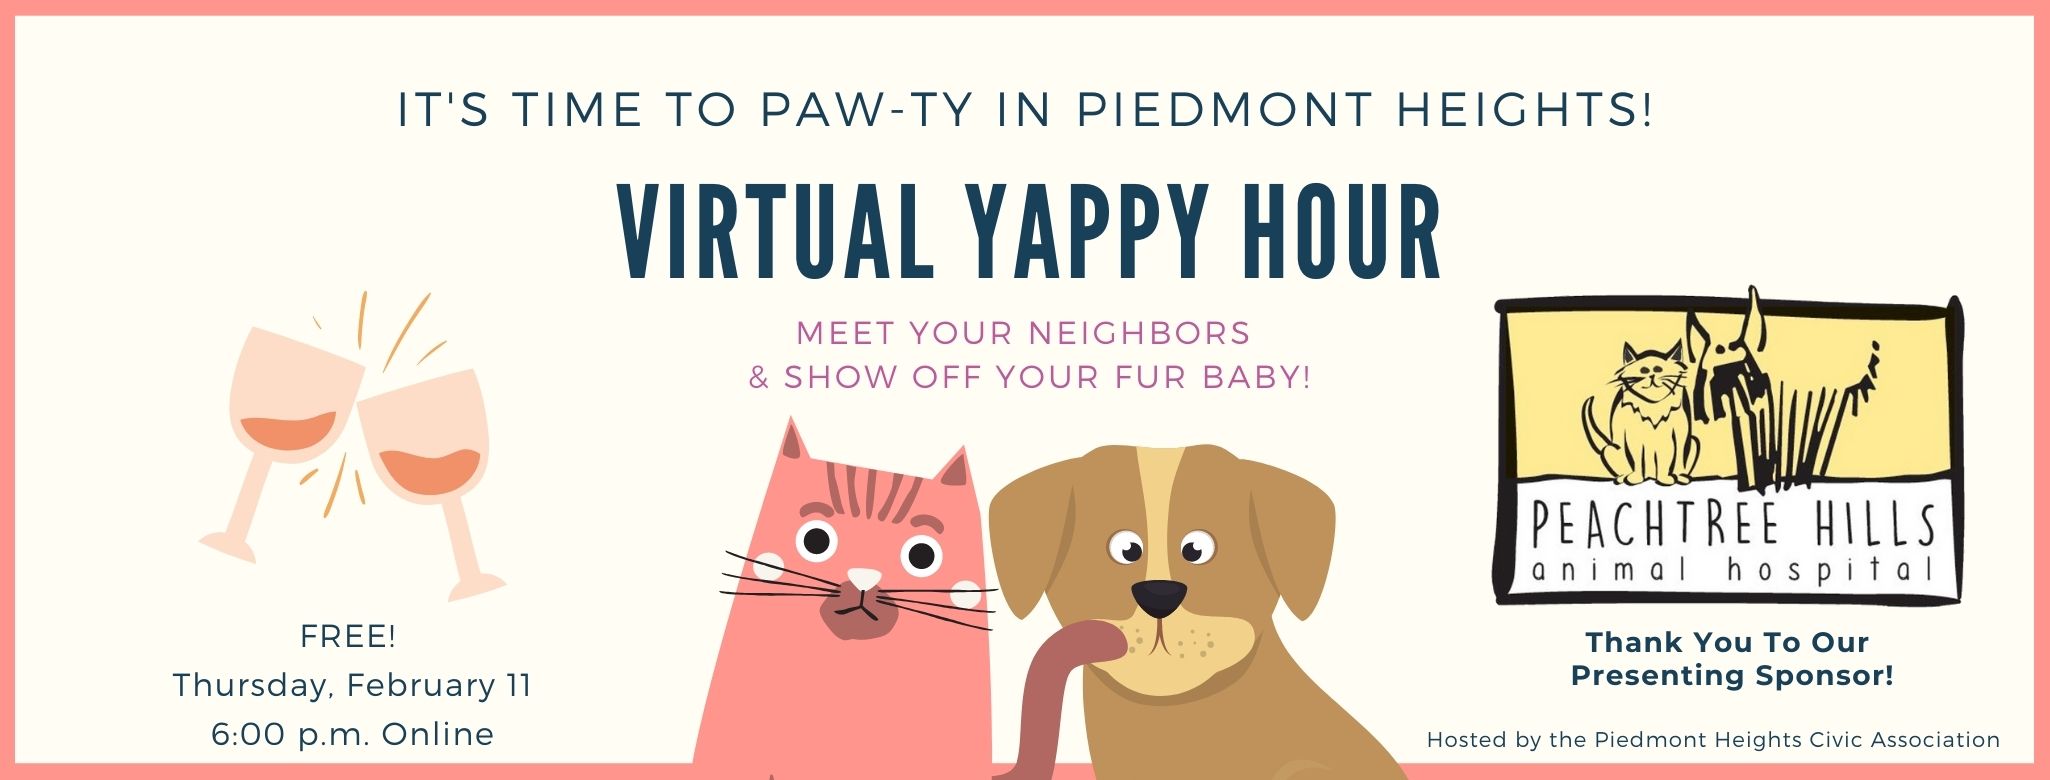 Piedmont Heights Civic Association - CANCELED: Virtual Yappy Hour with  Piedmont Heights' Lovable Pets